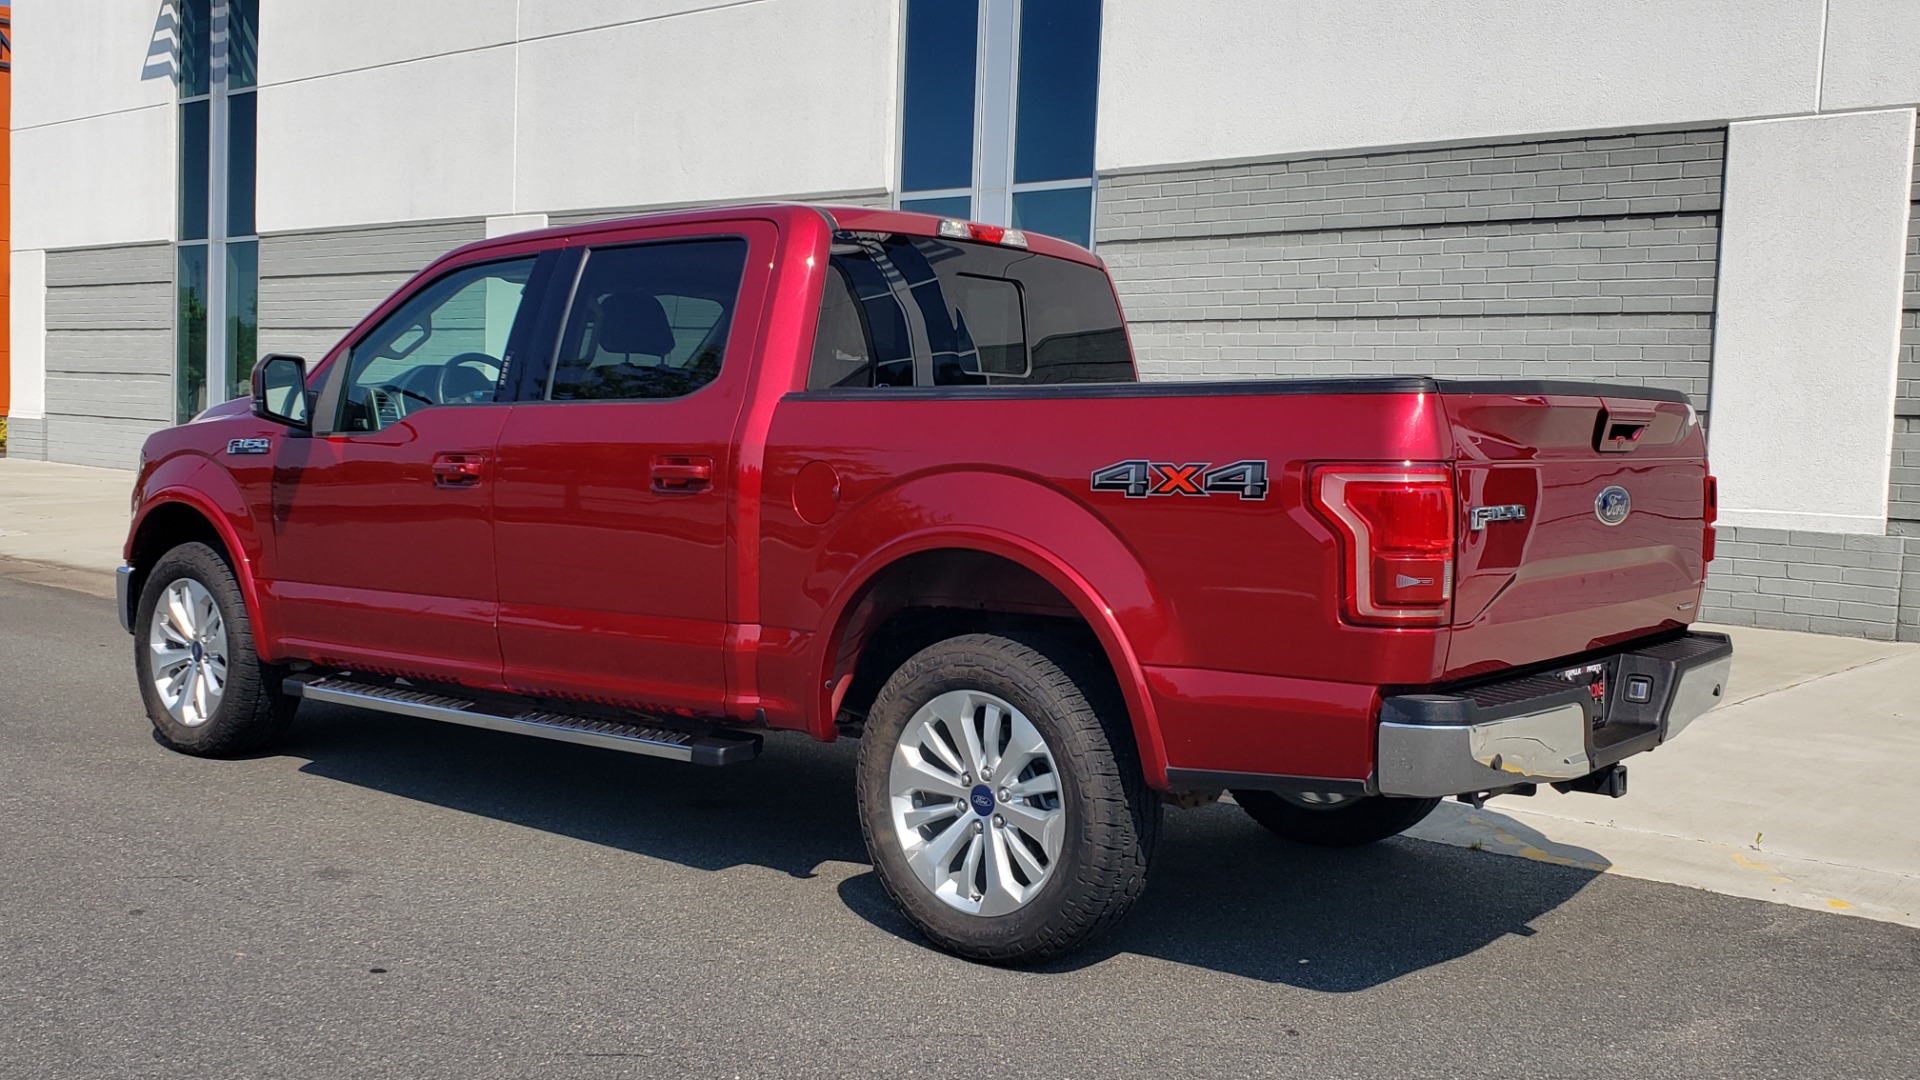 Used 2015 Ford F-150 LARIAT 4X4 SUPERCREW / 5.0L V8 / AUTO / NAV / SUNROOF / REARVIEW for sale Sold at Formula Imports in Charlotte NC 28227 6